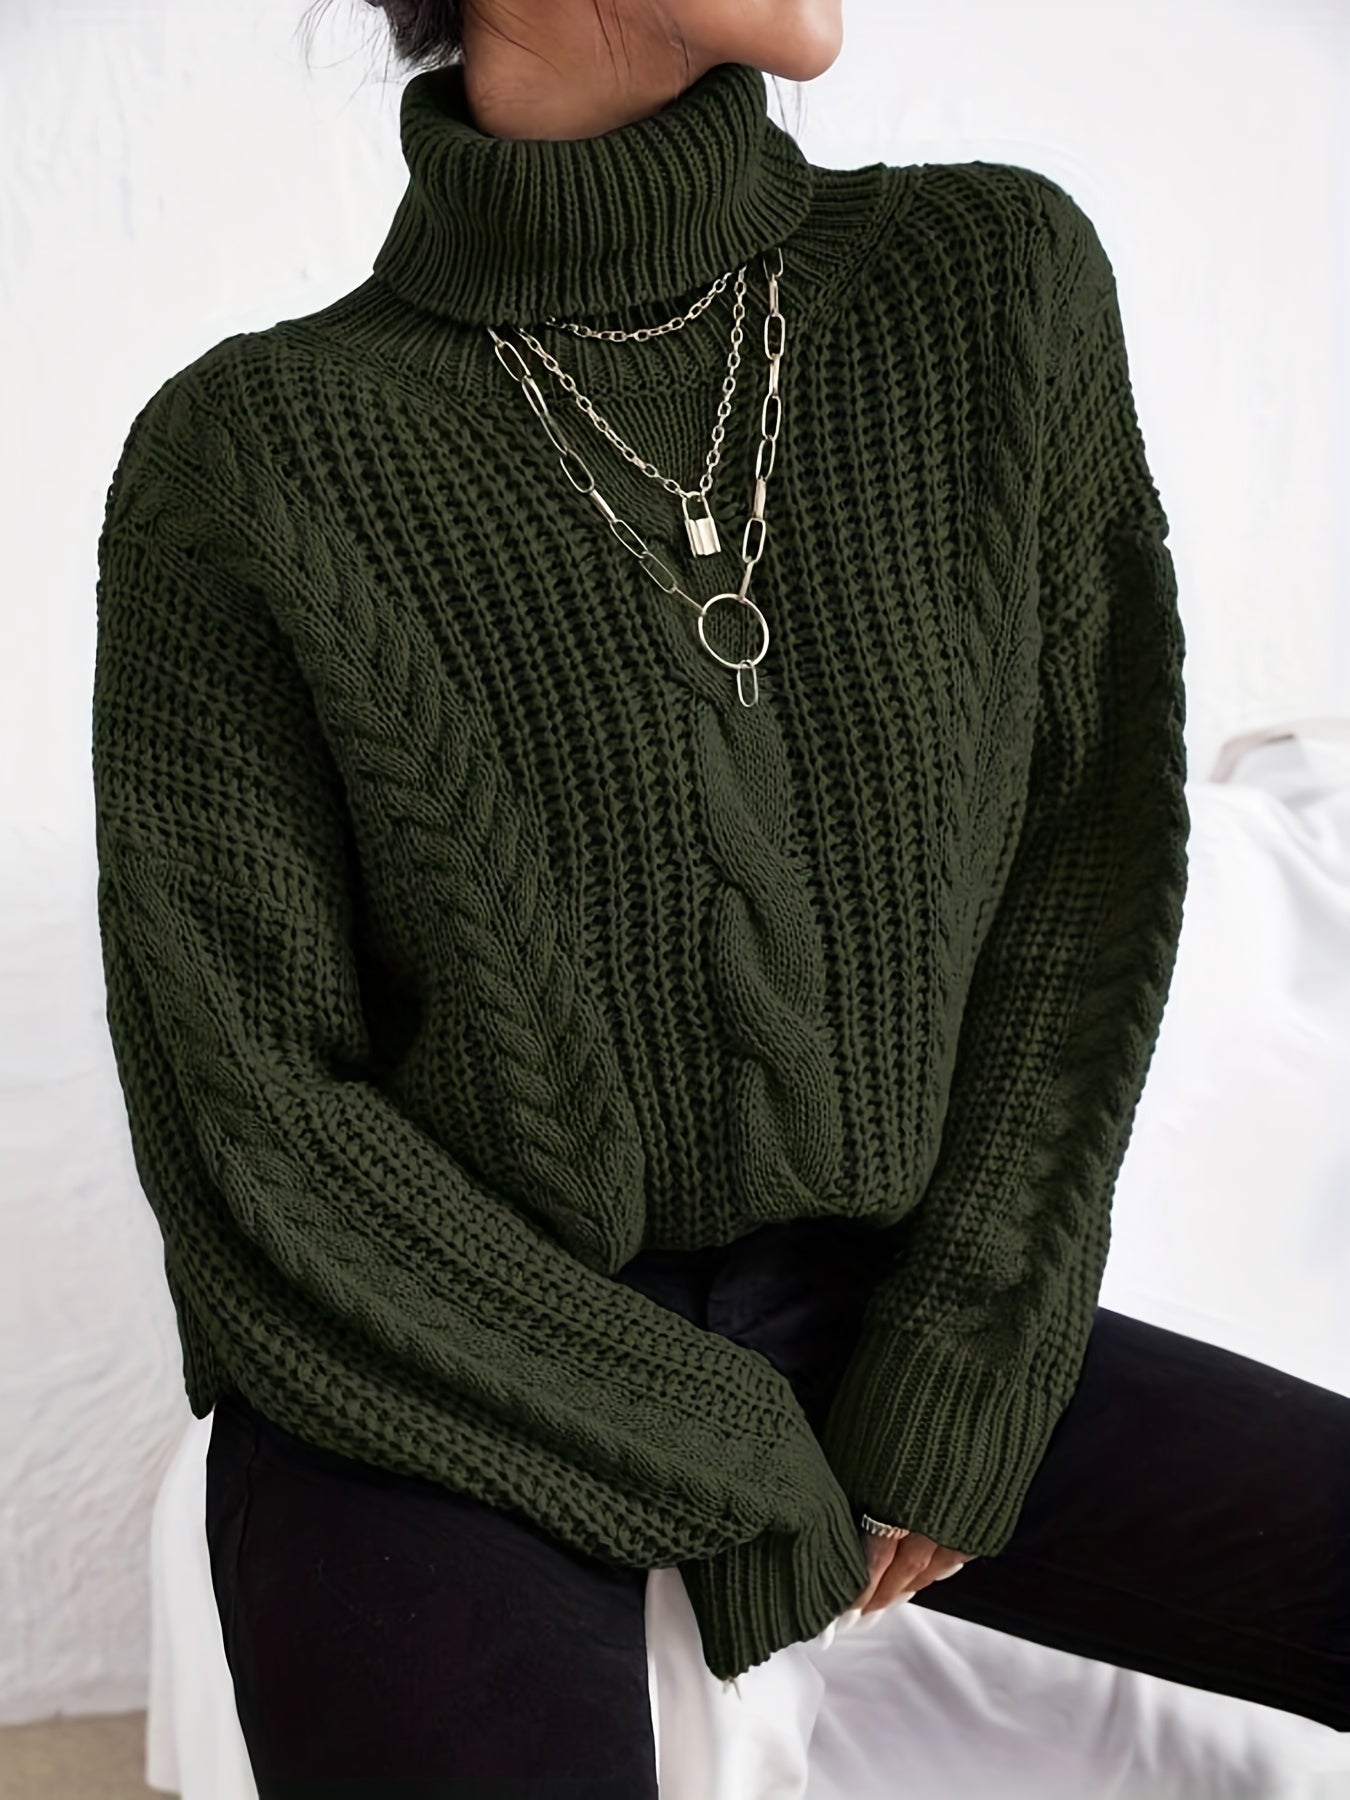 Antmvs Cable Knitted Turtle Neck Sweater, Casual Long Sleeve Sweater For Fall & Winter, Women's Clothing